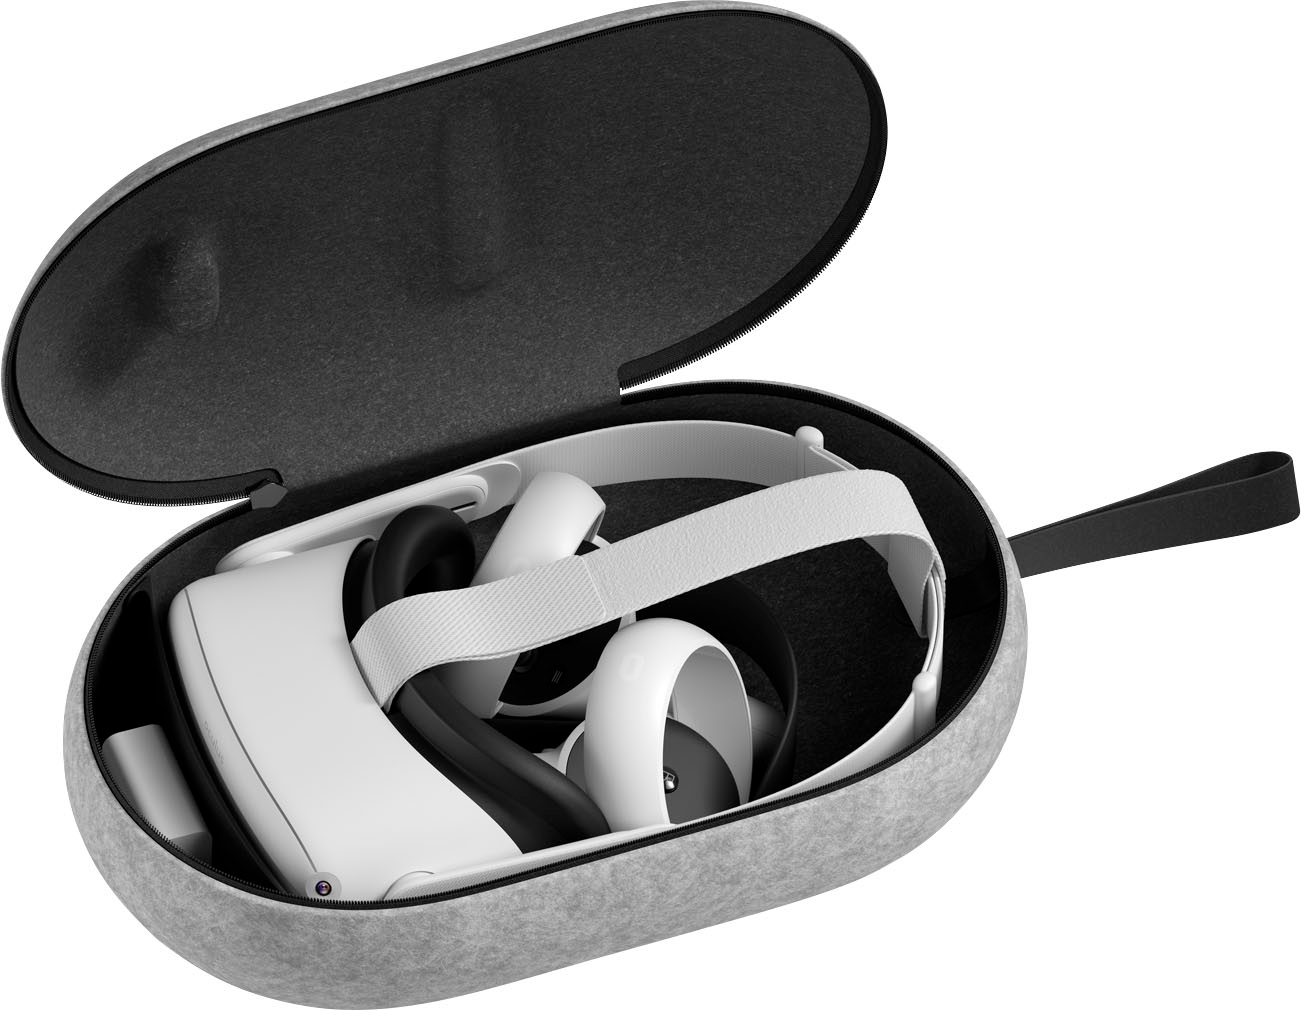 Meta Quest 2 All-In-One VR Headset - 256GB with Quest 2 Carrying Case